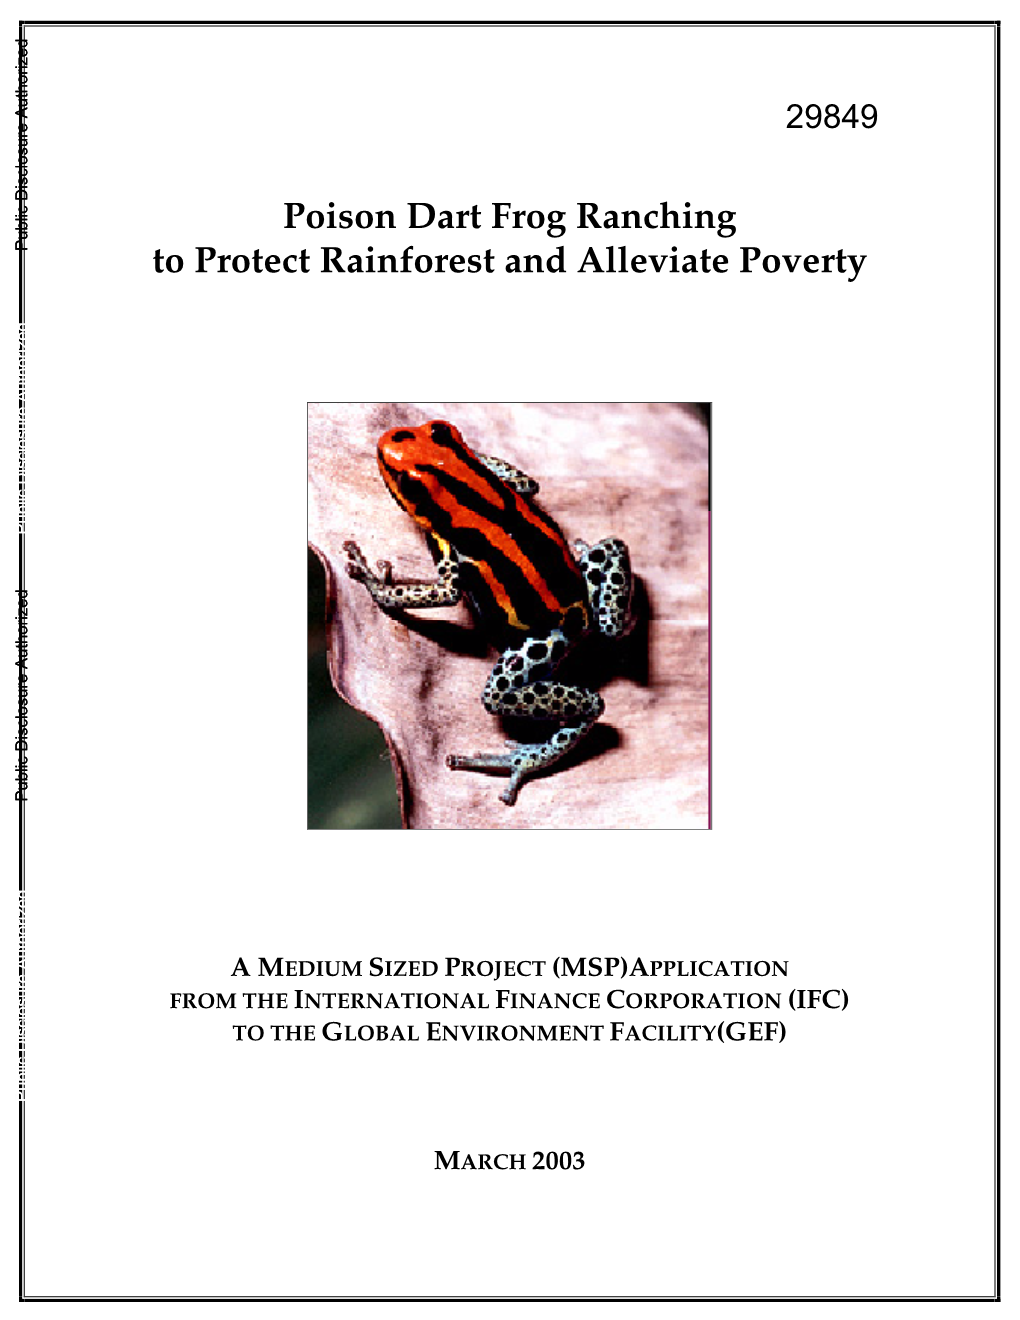 Poison Dart Frog Ranching to Protect Rainforest